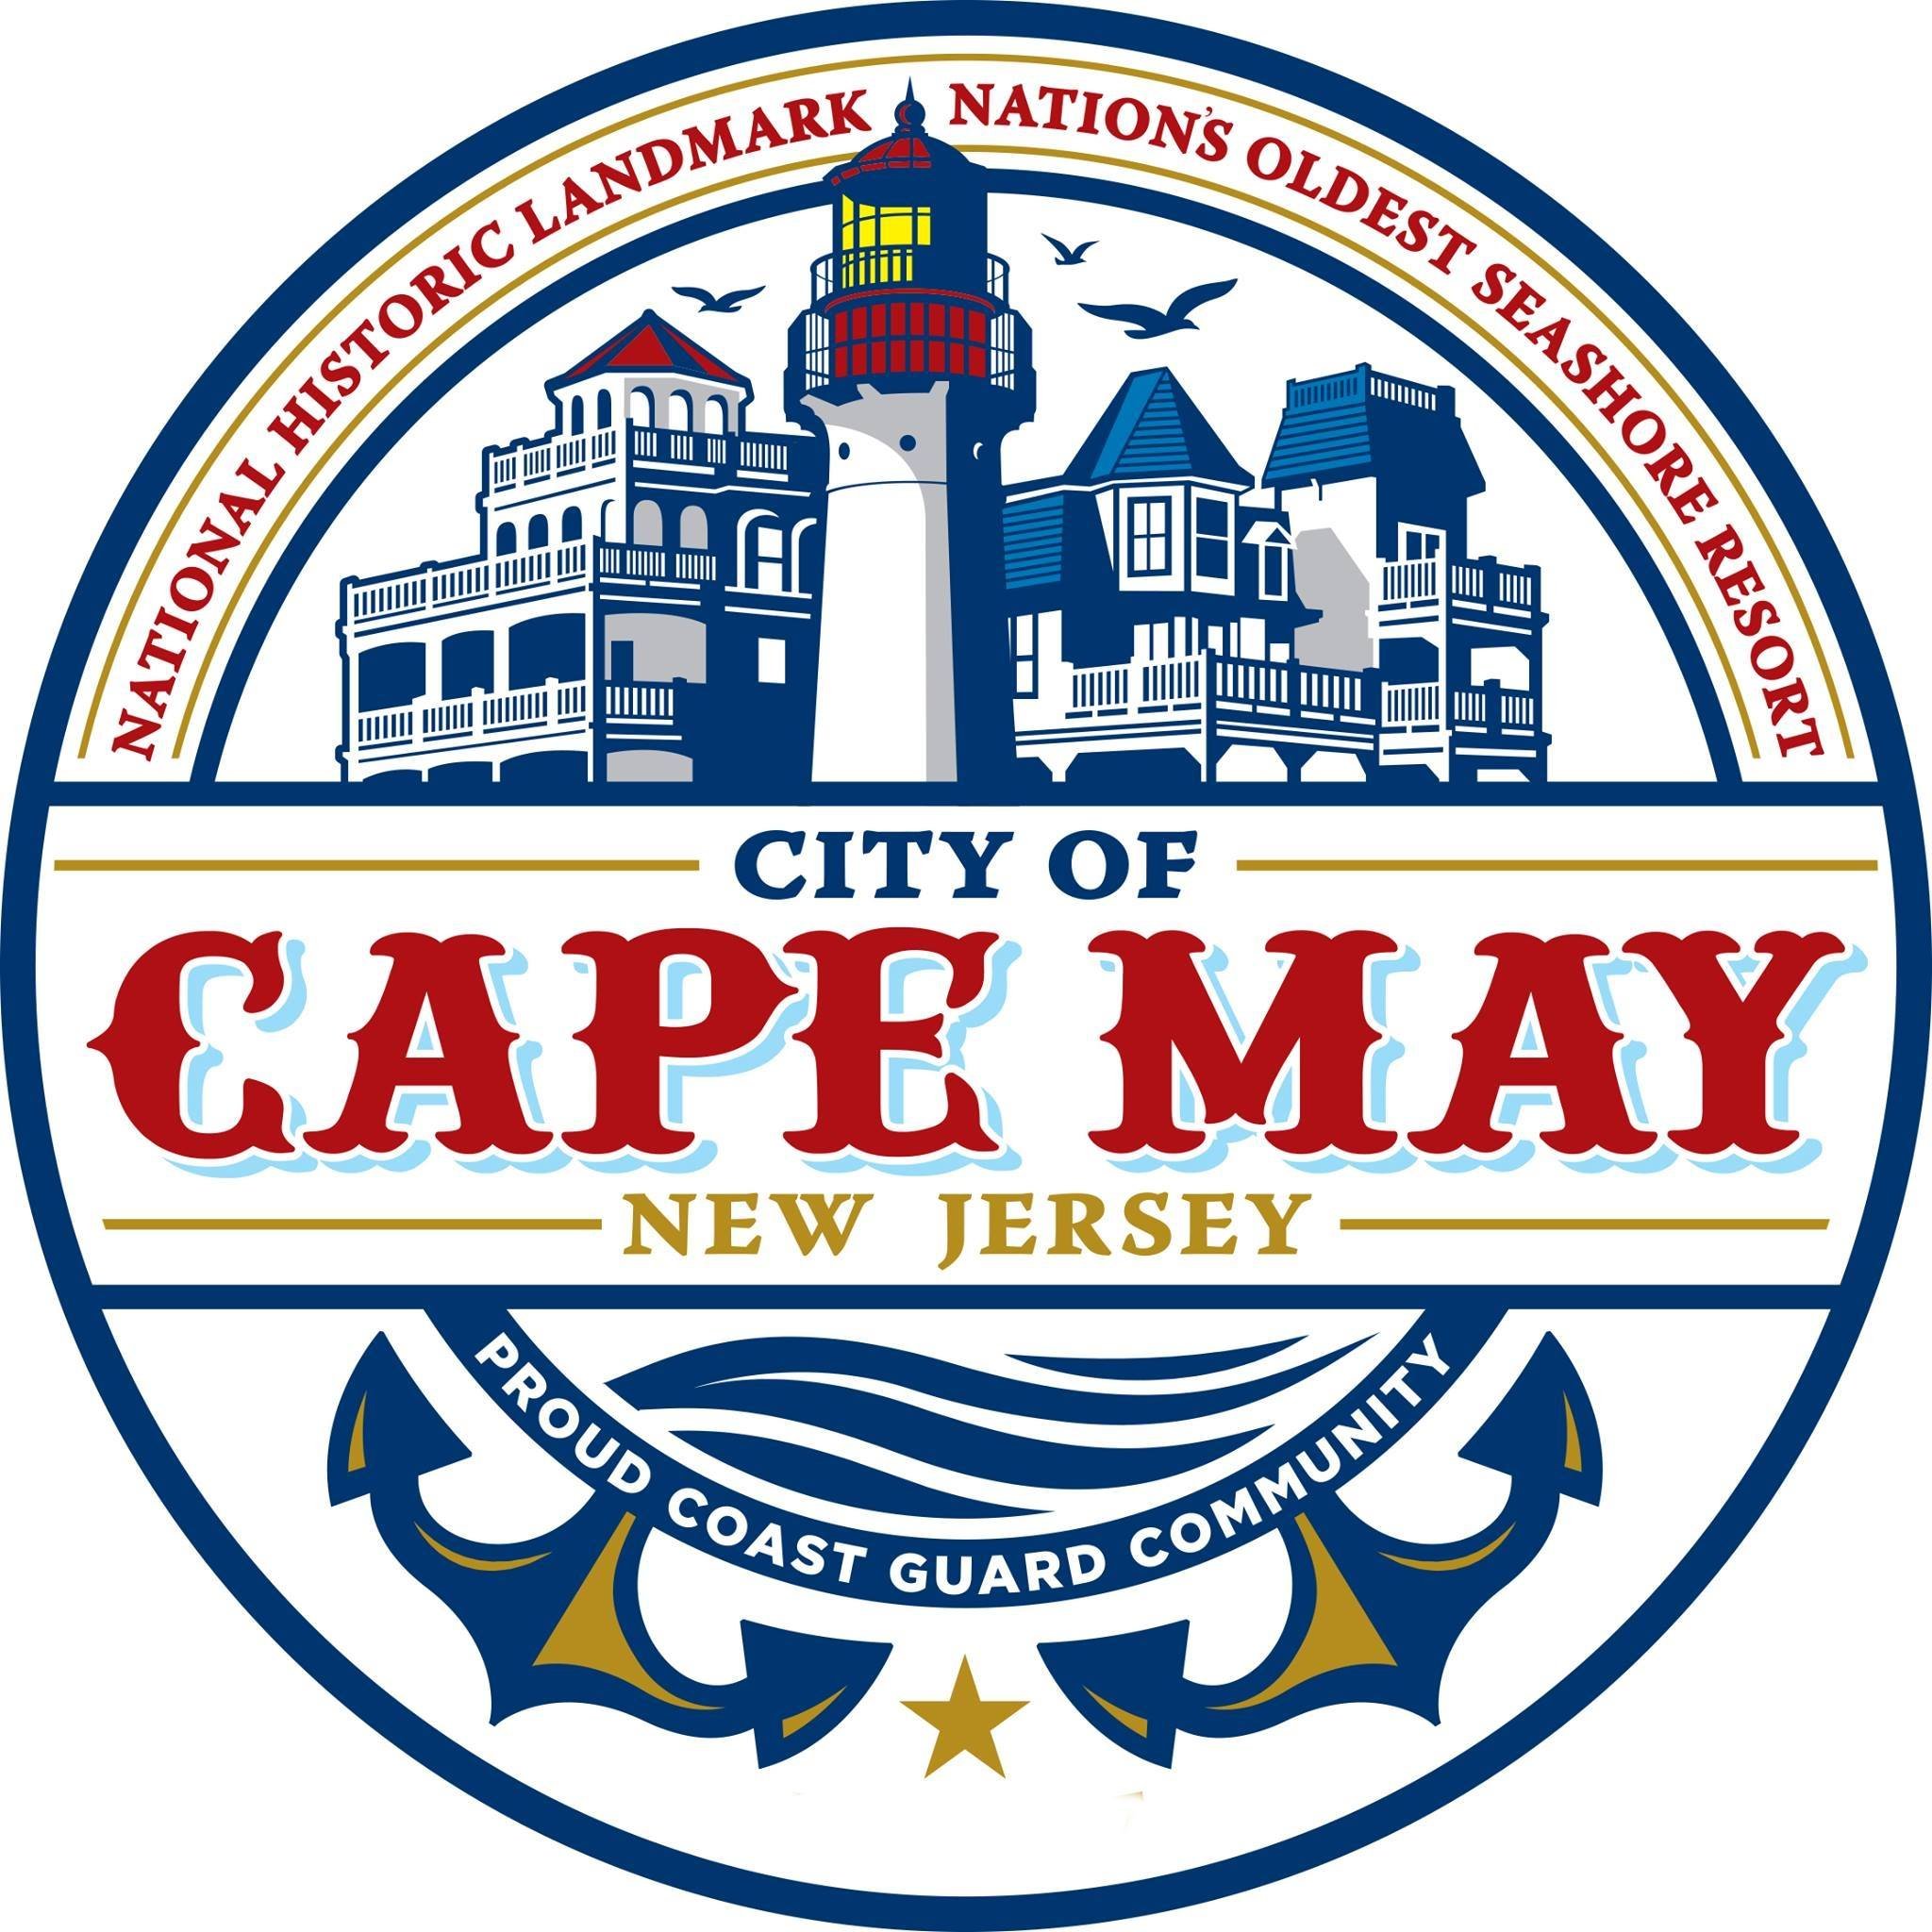 City of Cape May.png